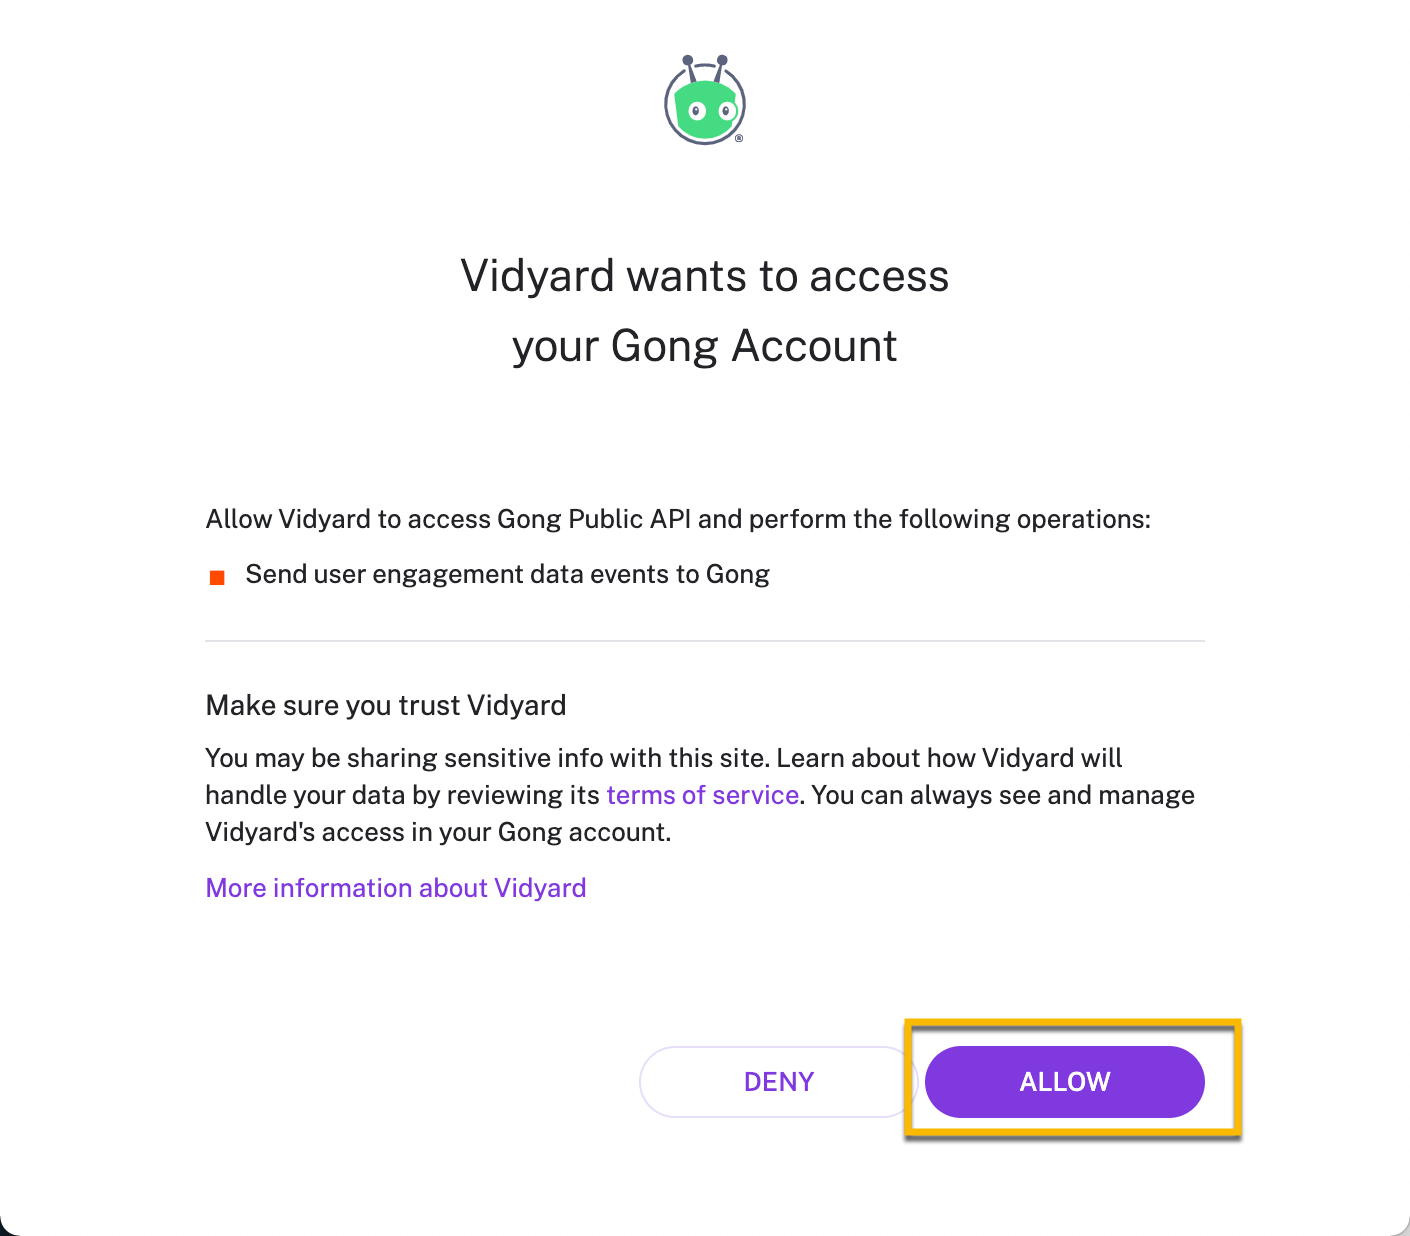 While connecting Vidyard to Gong, selecting the Allow button to give Vidyard access to your account